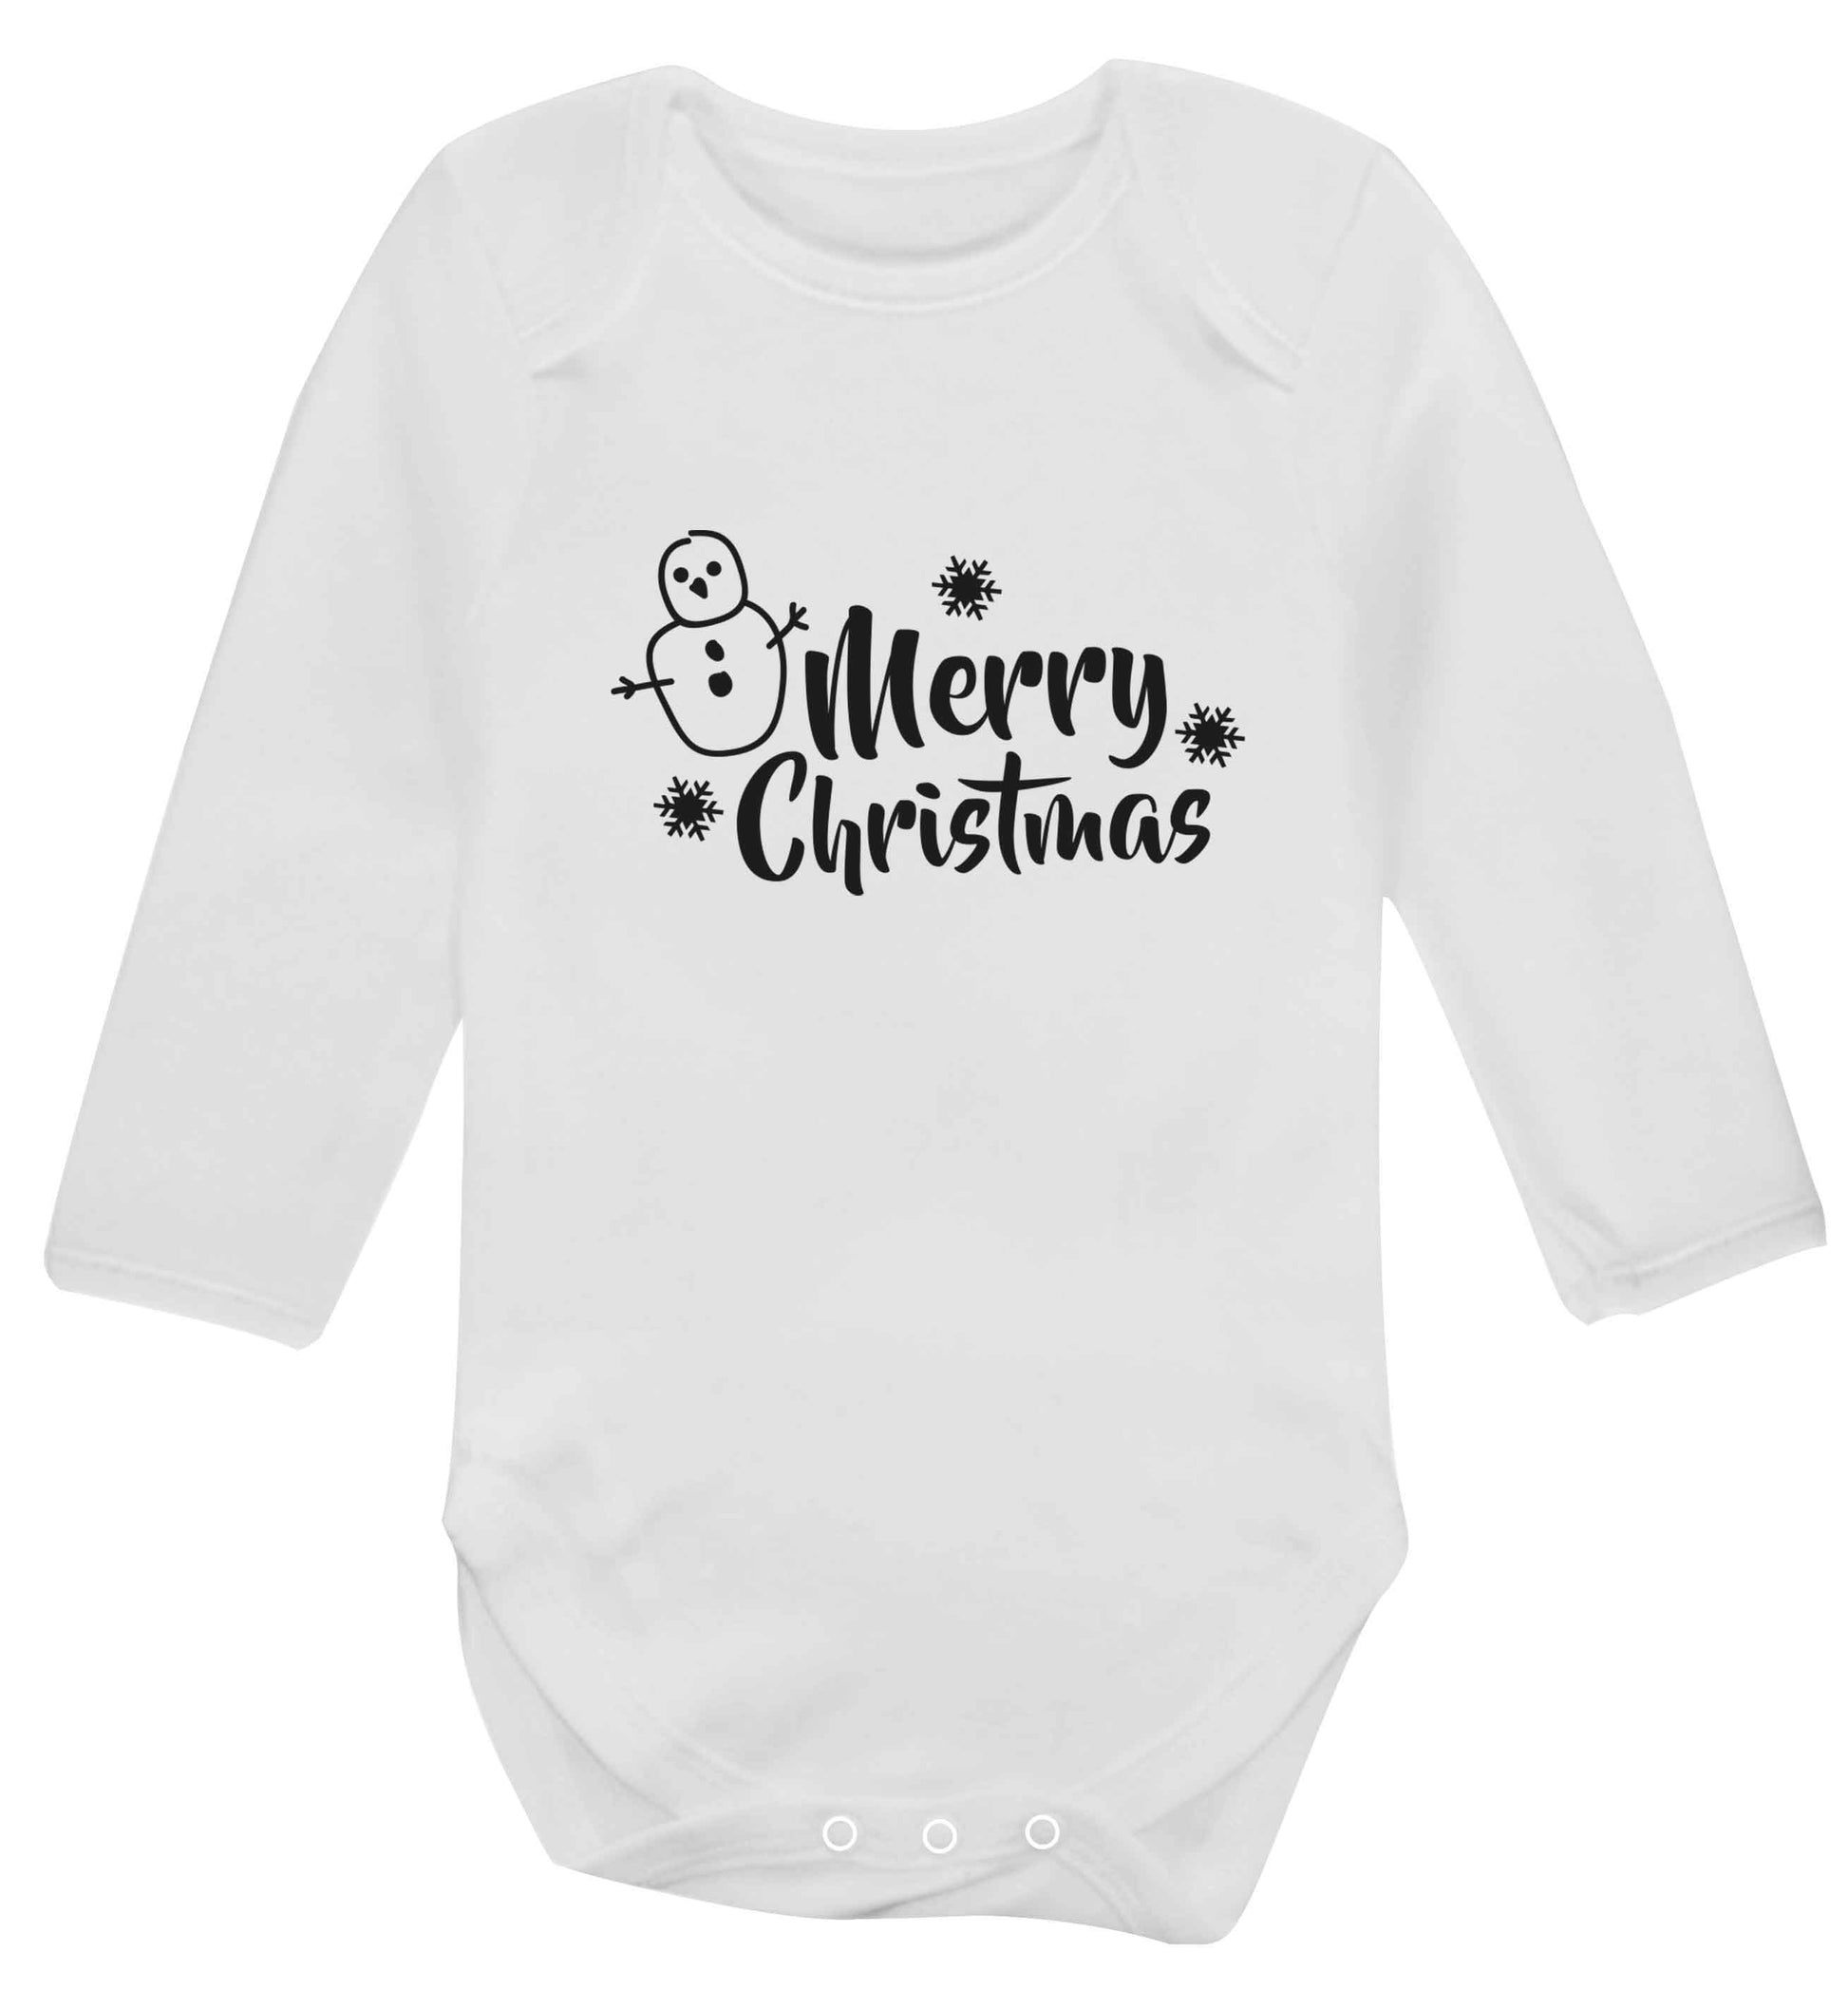 Merry Christmas - snowman baby vest long sleeved white 6-12 months